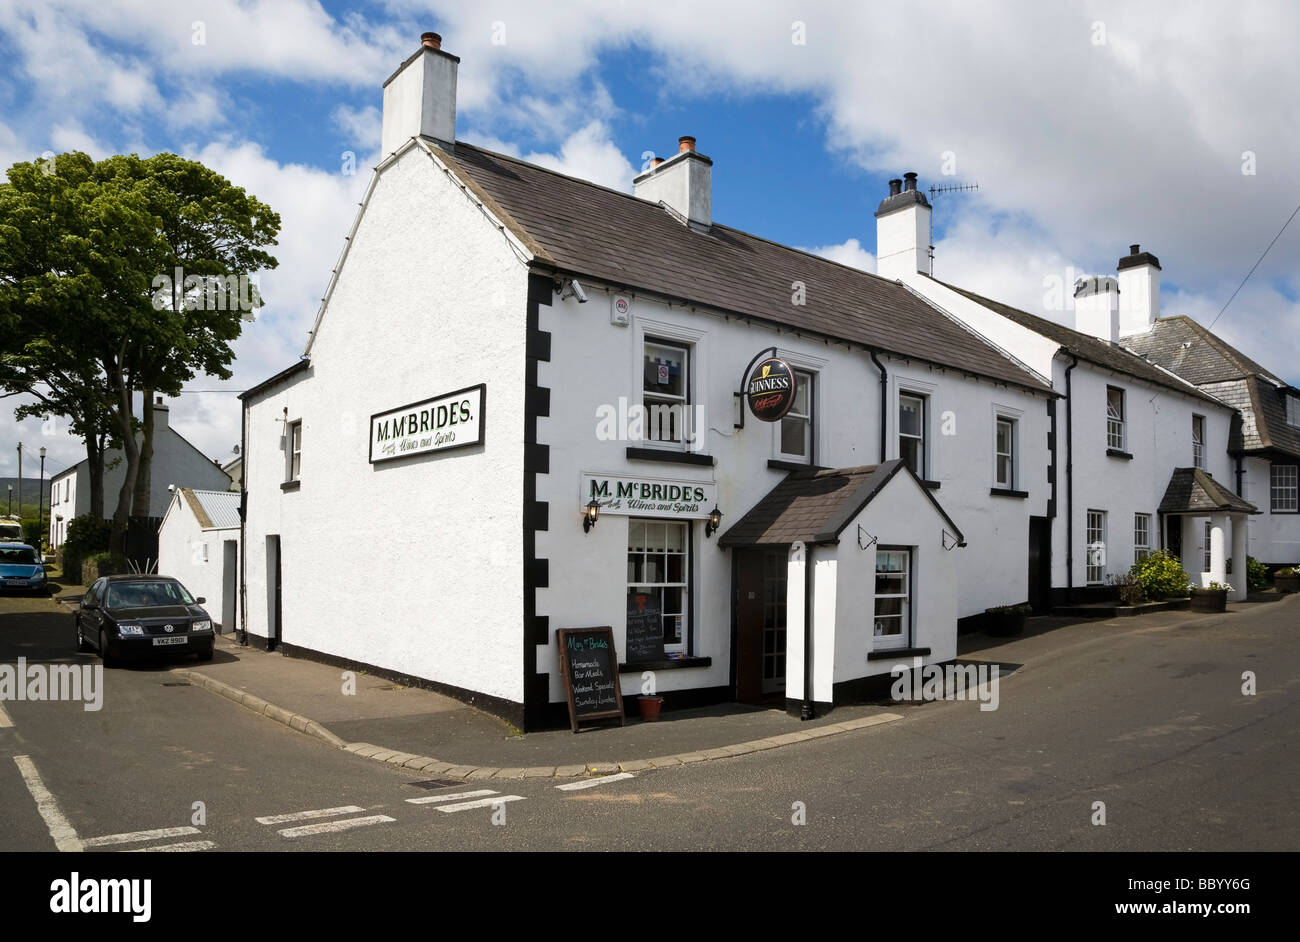 McBrides Pub where the original bar is supposedly the smallest in Ireland measuring just 2.7m by 1.5m, Cushendun, County Antrim, Ireland Stock Photo